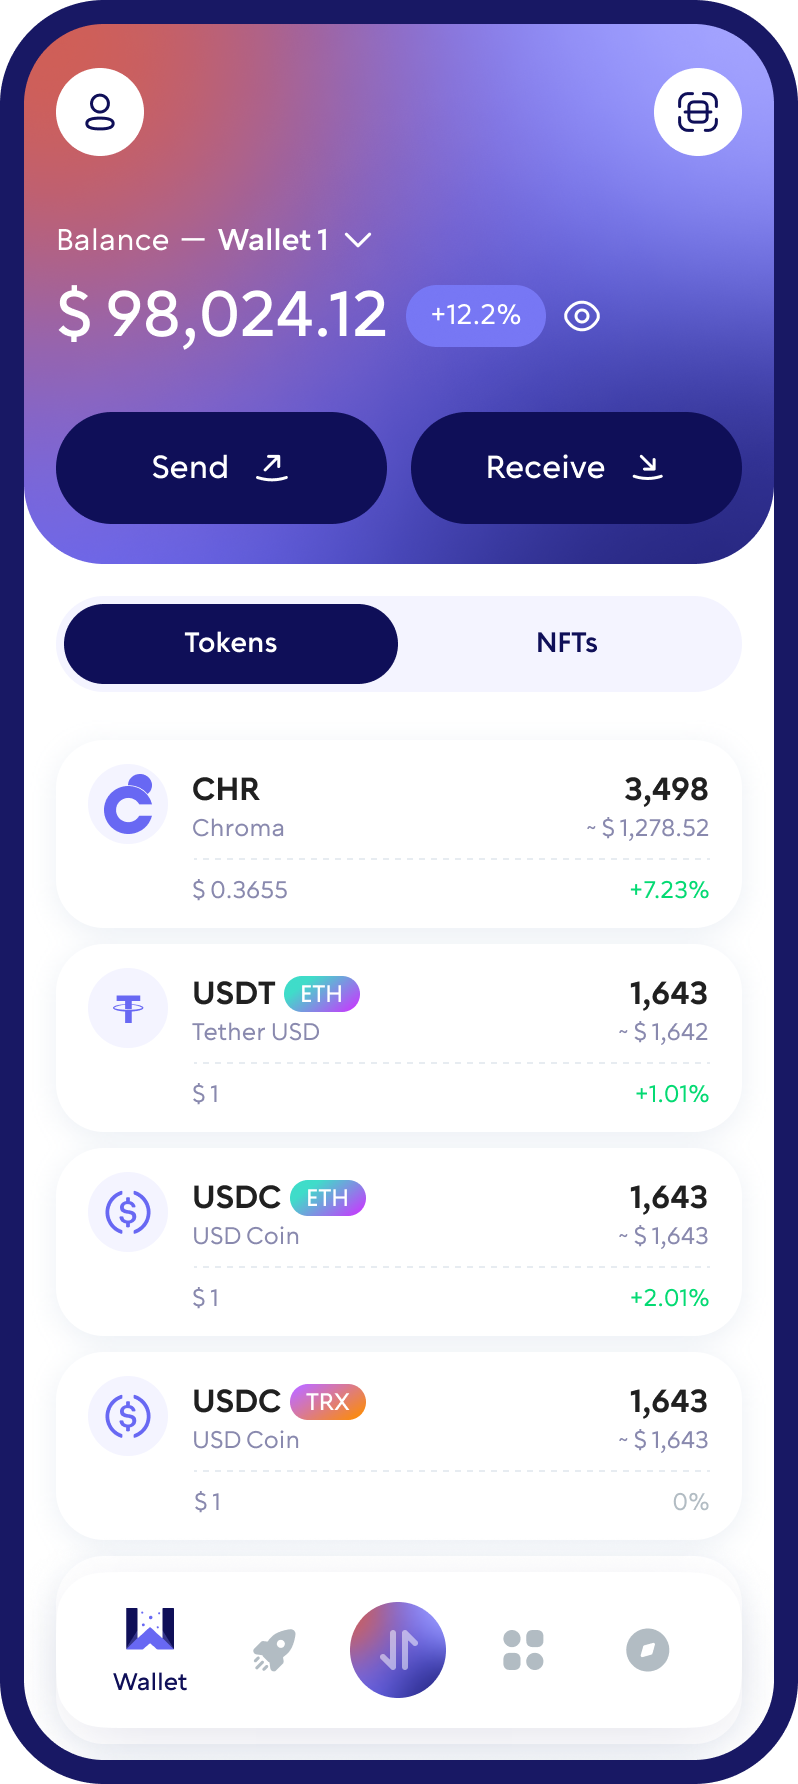 Chroma (CHR) Cryptocurrency Wallet Walletverse